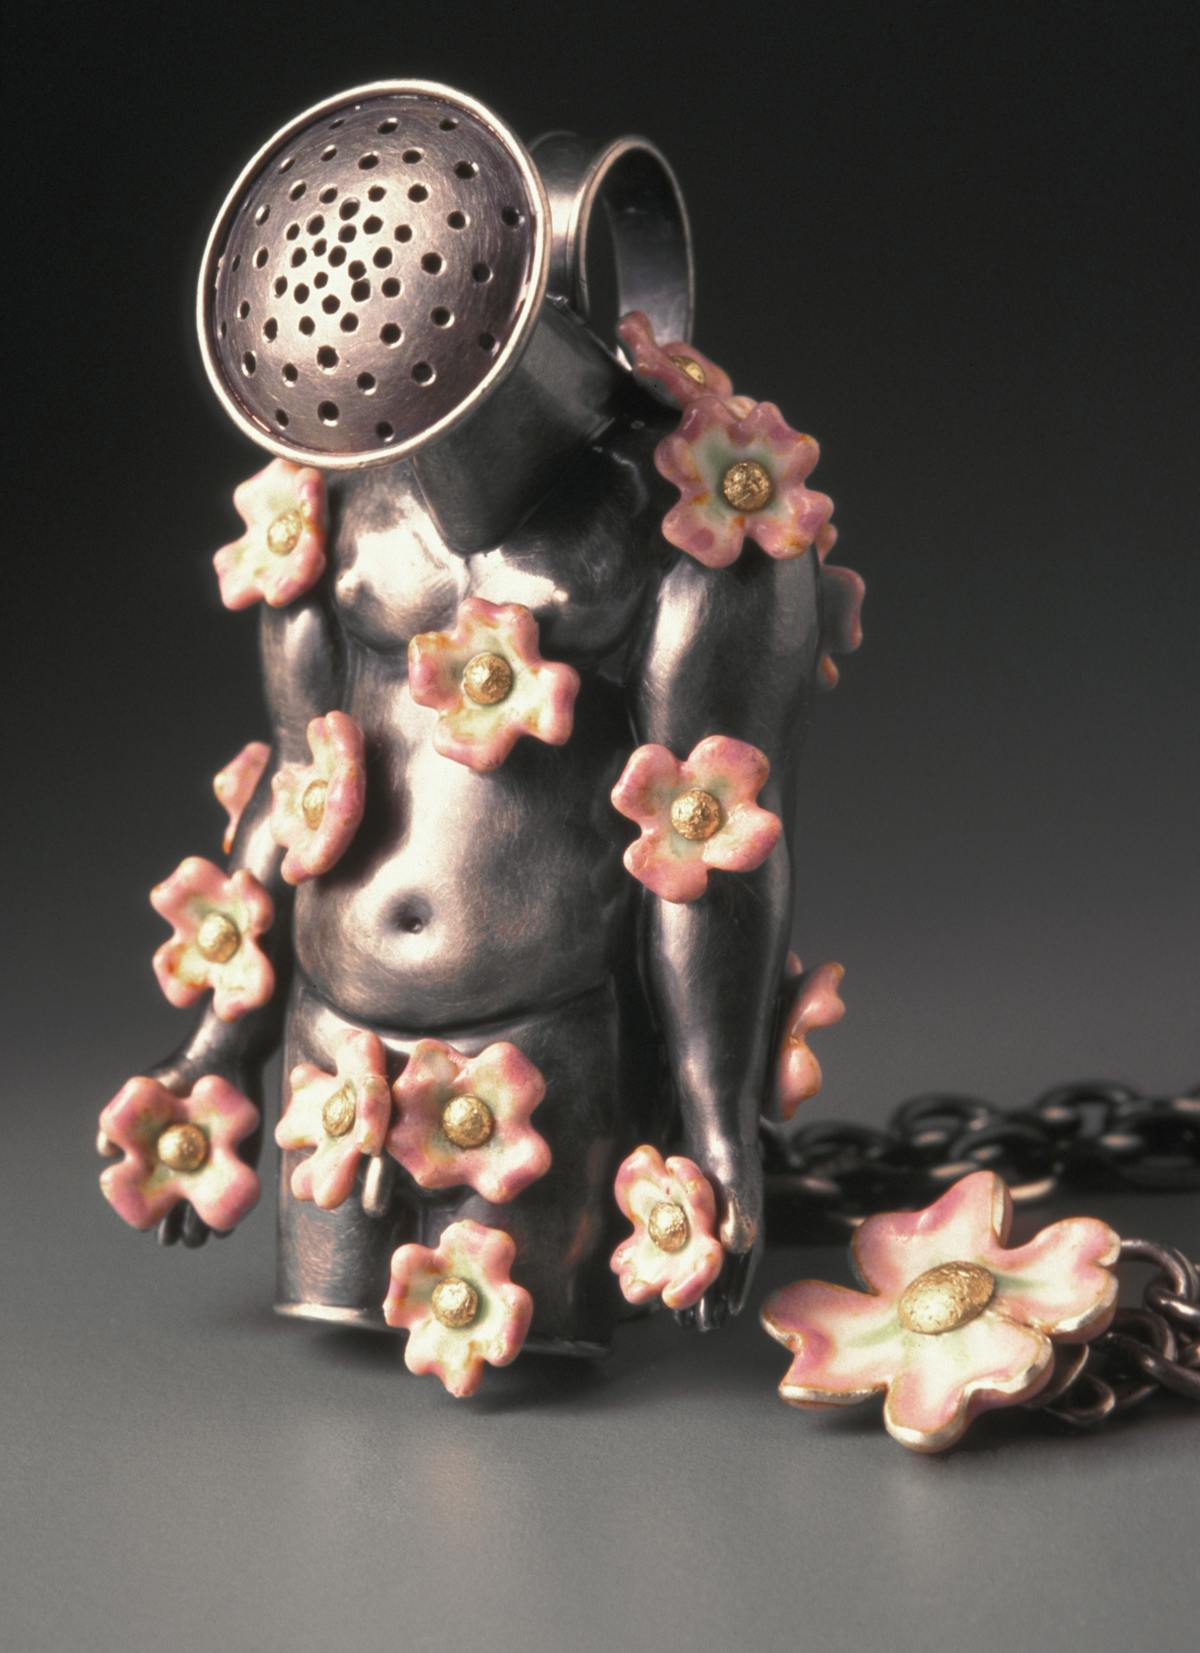 art jewelry necklace with pendant in the shape of a torso with watering can spout for head and covered in pink flowers